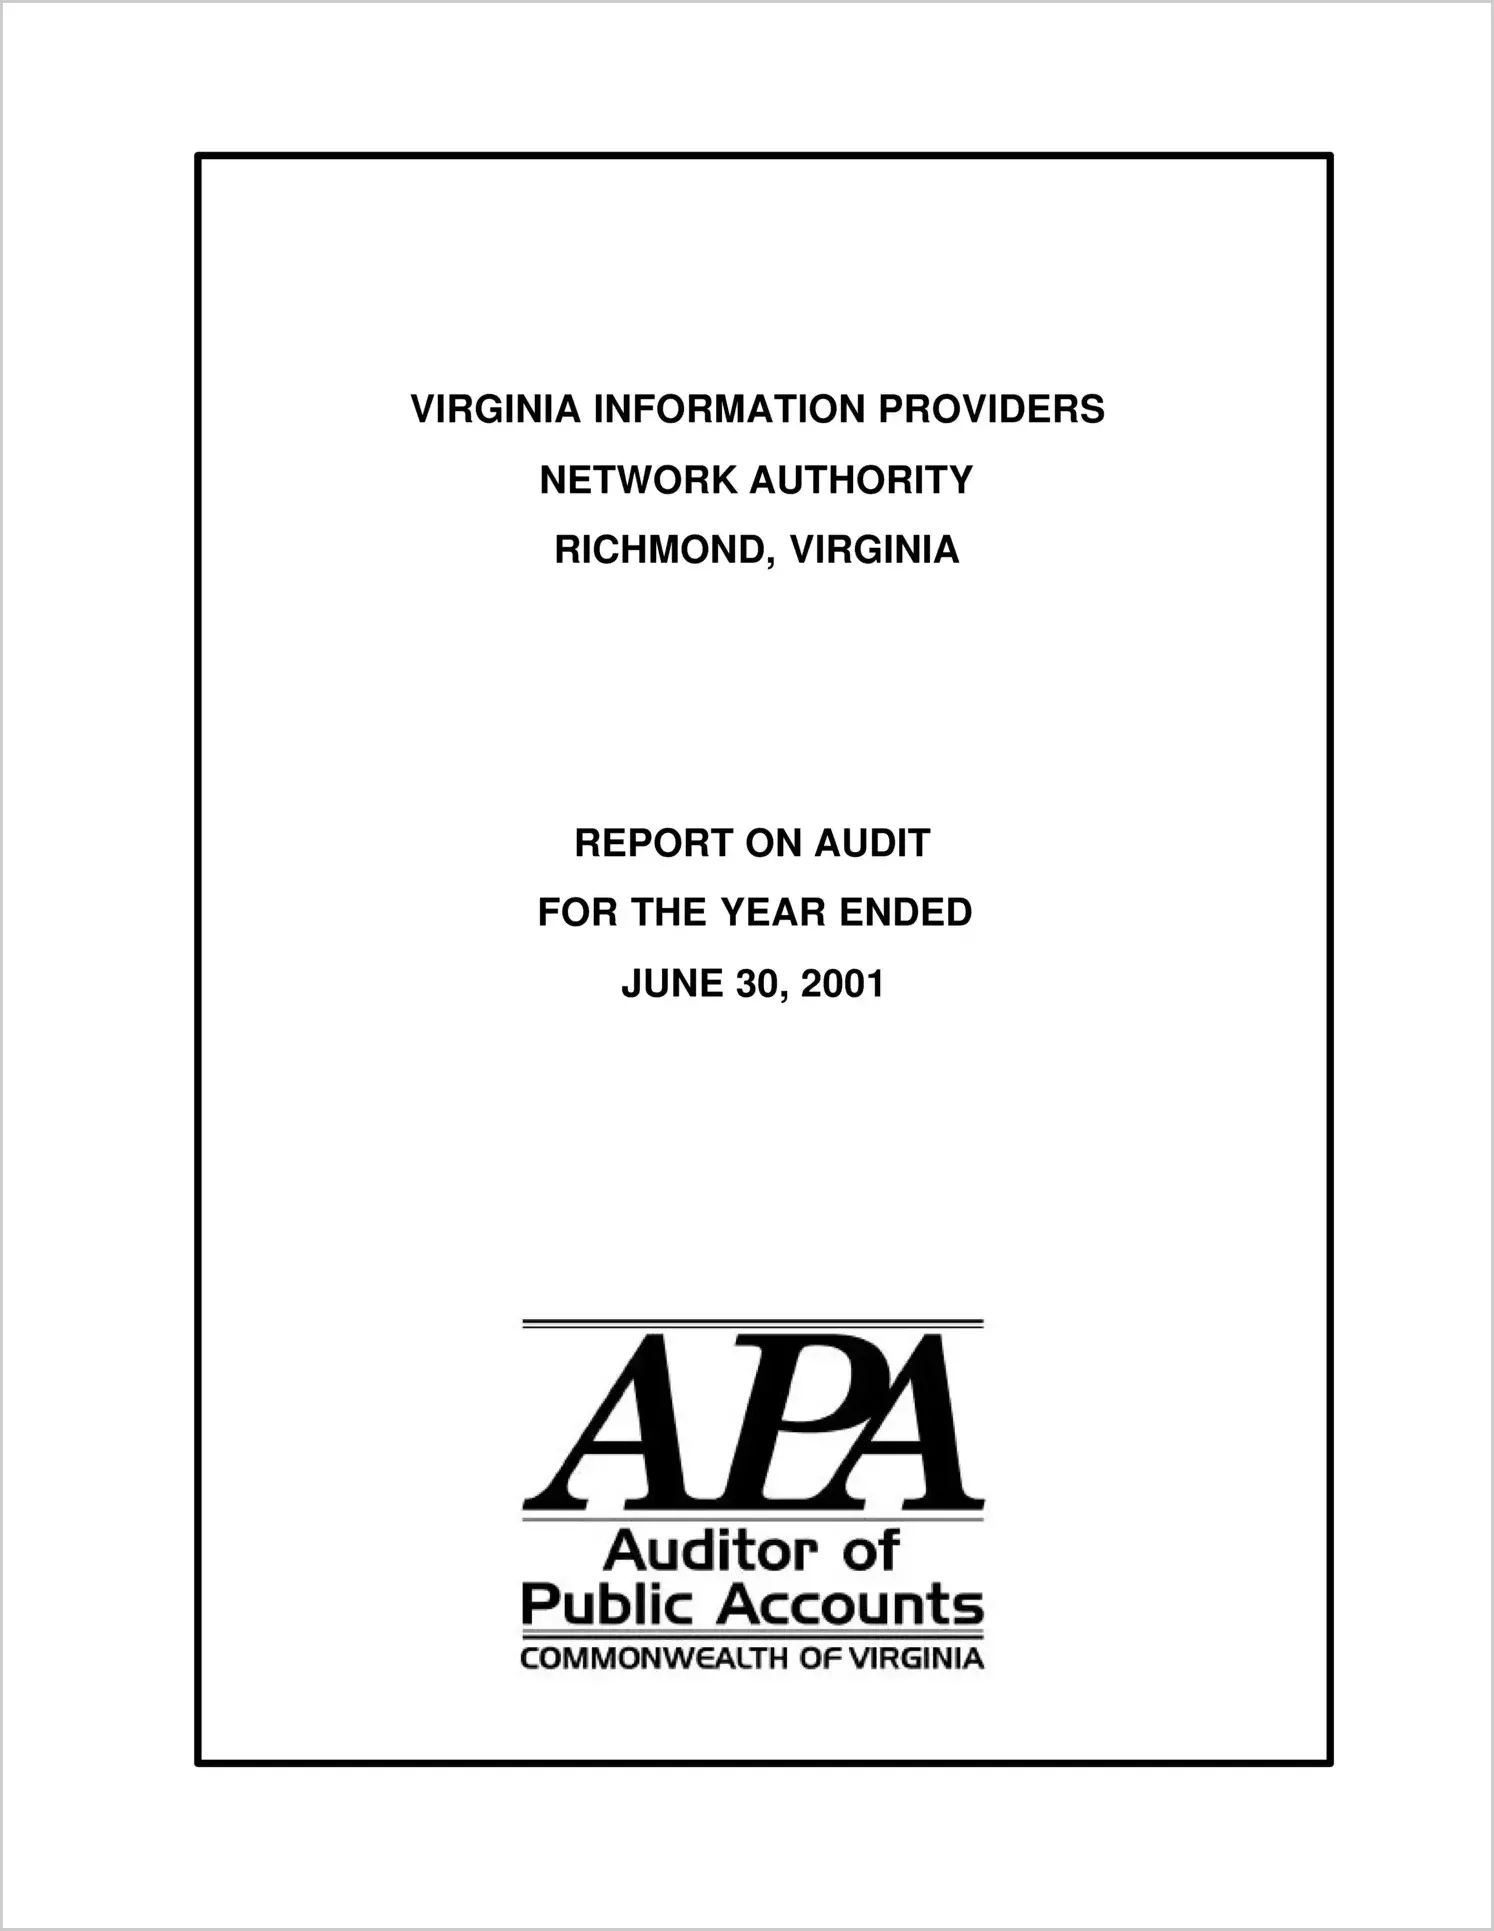 Virginia Information Providers Network Authority for the year ended June 30, 2001